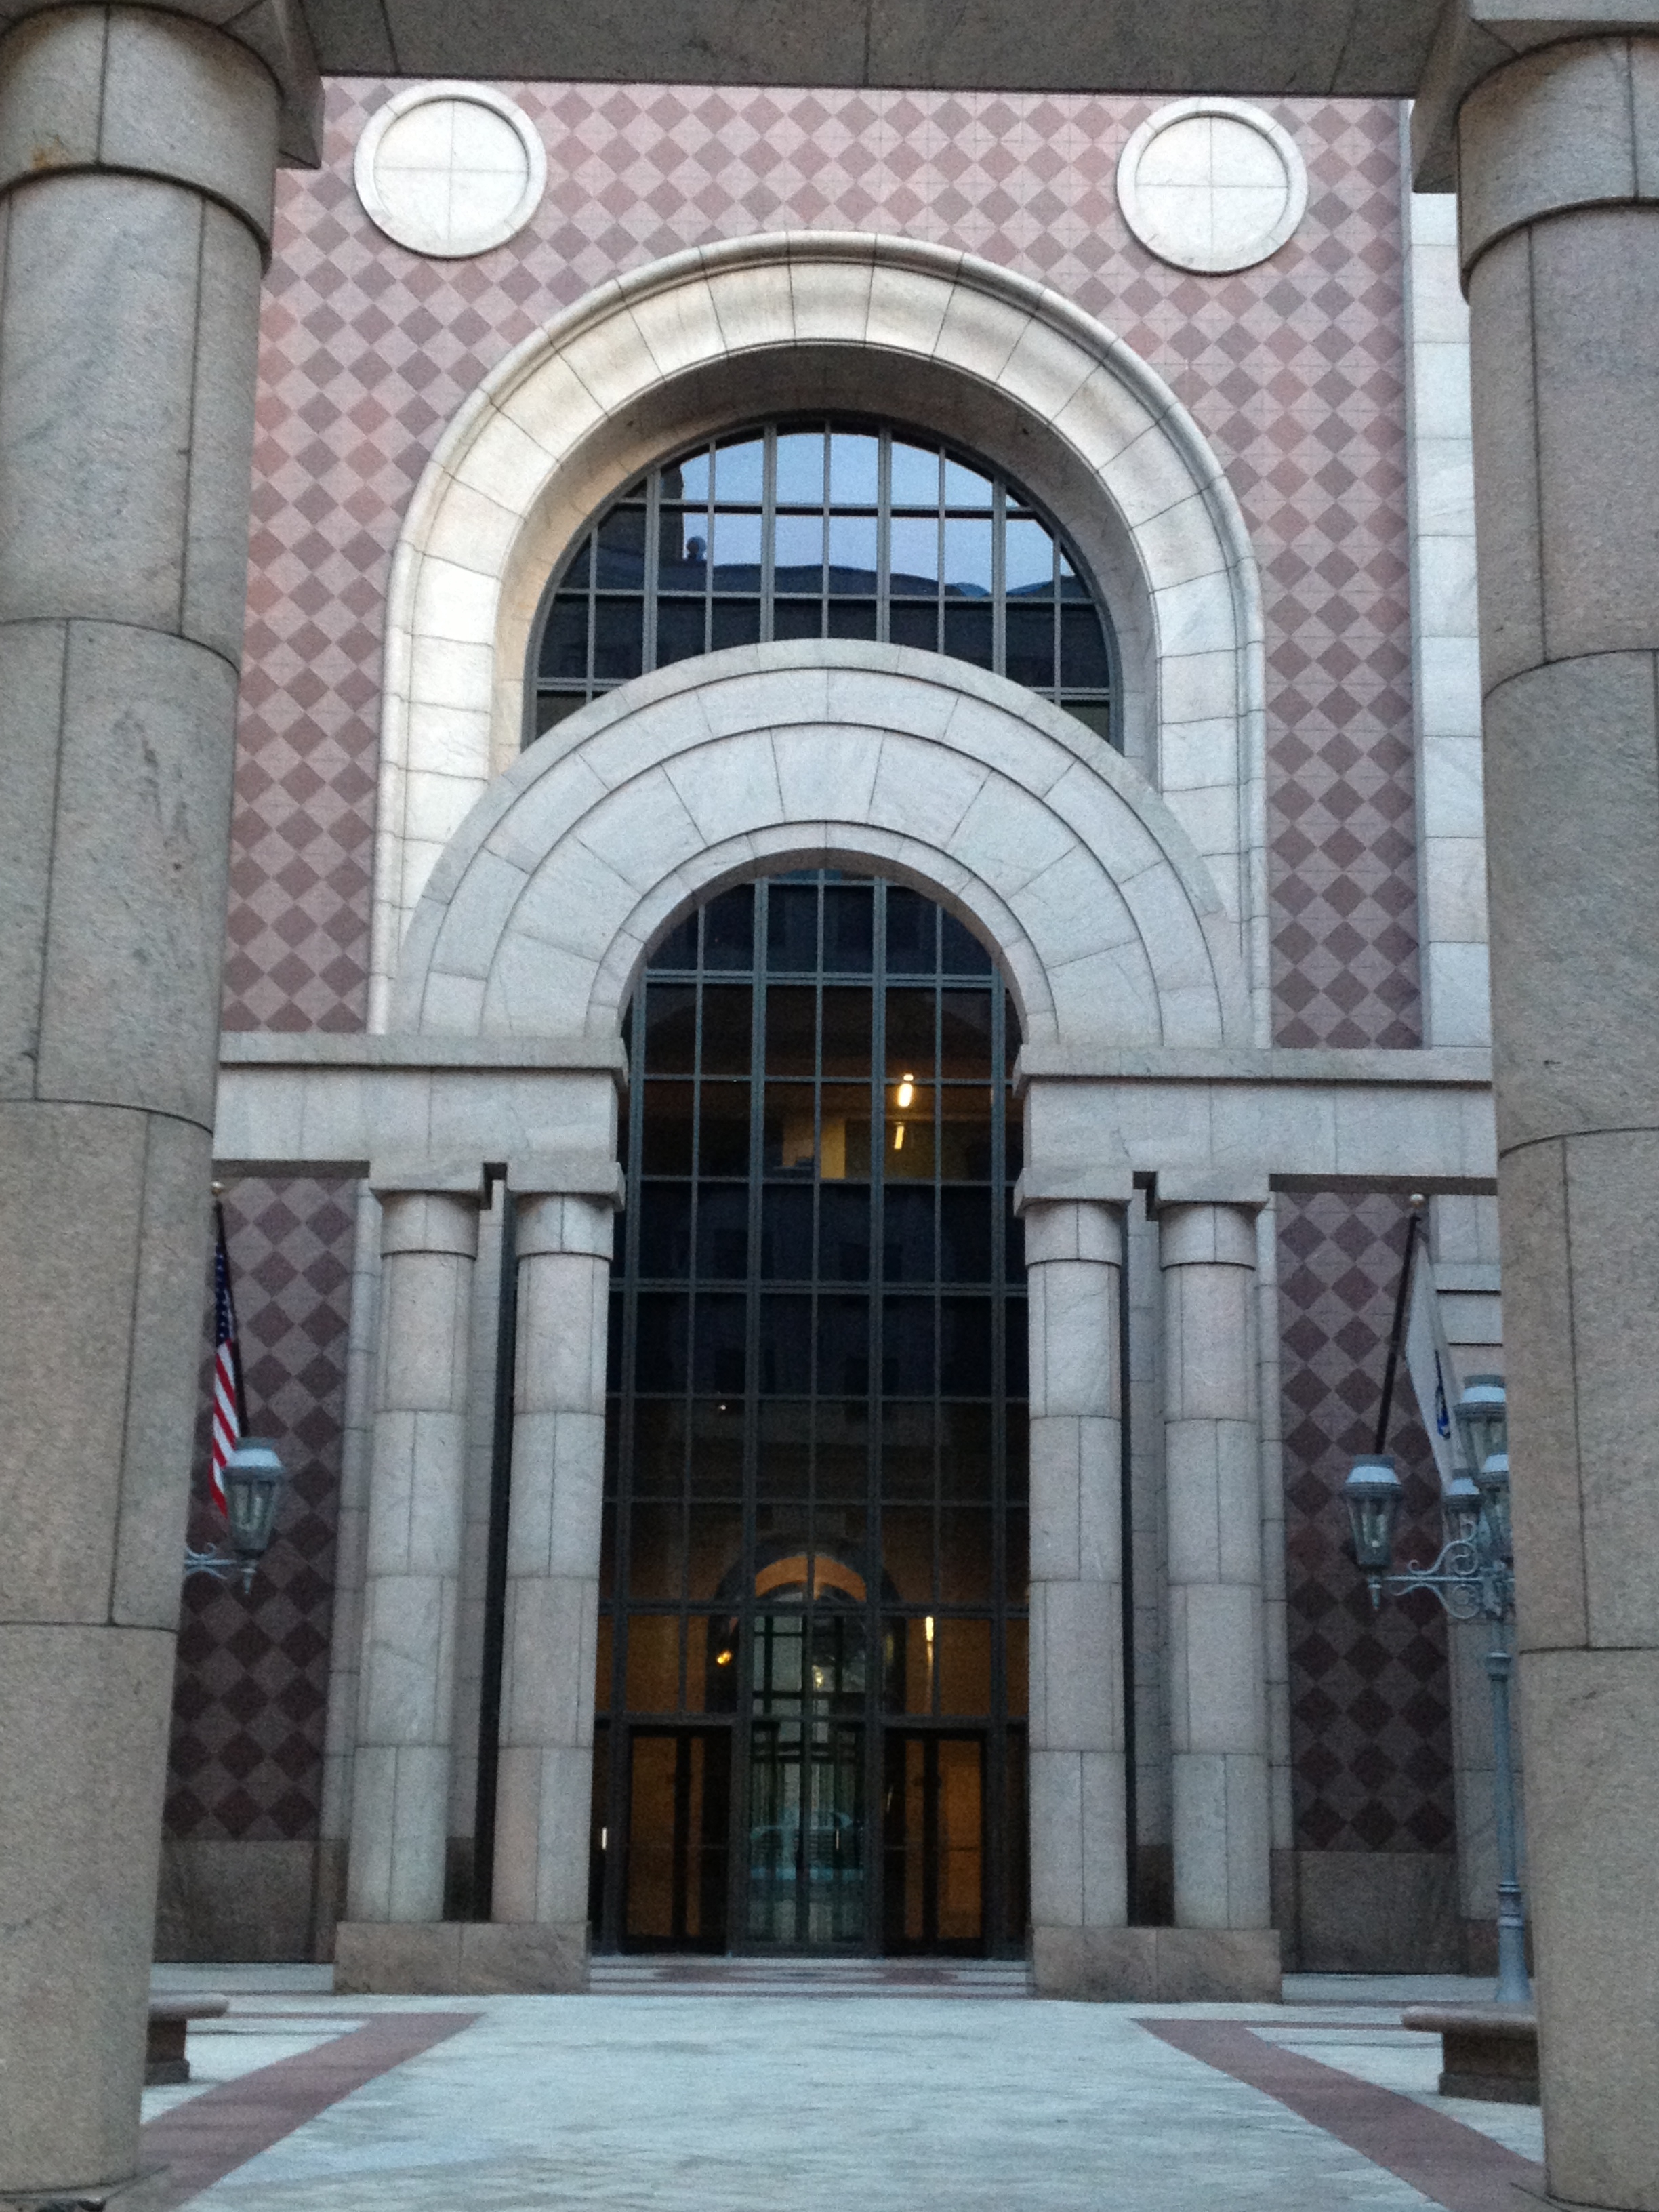 Beautiful large front entrance to a building